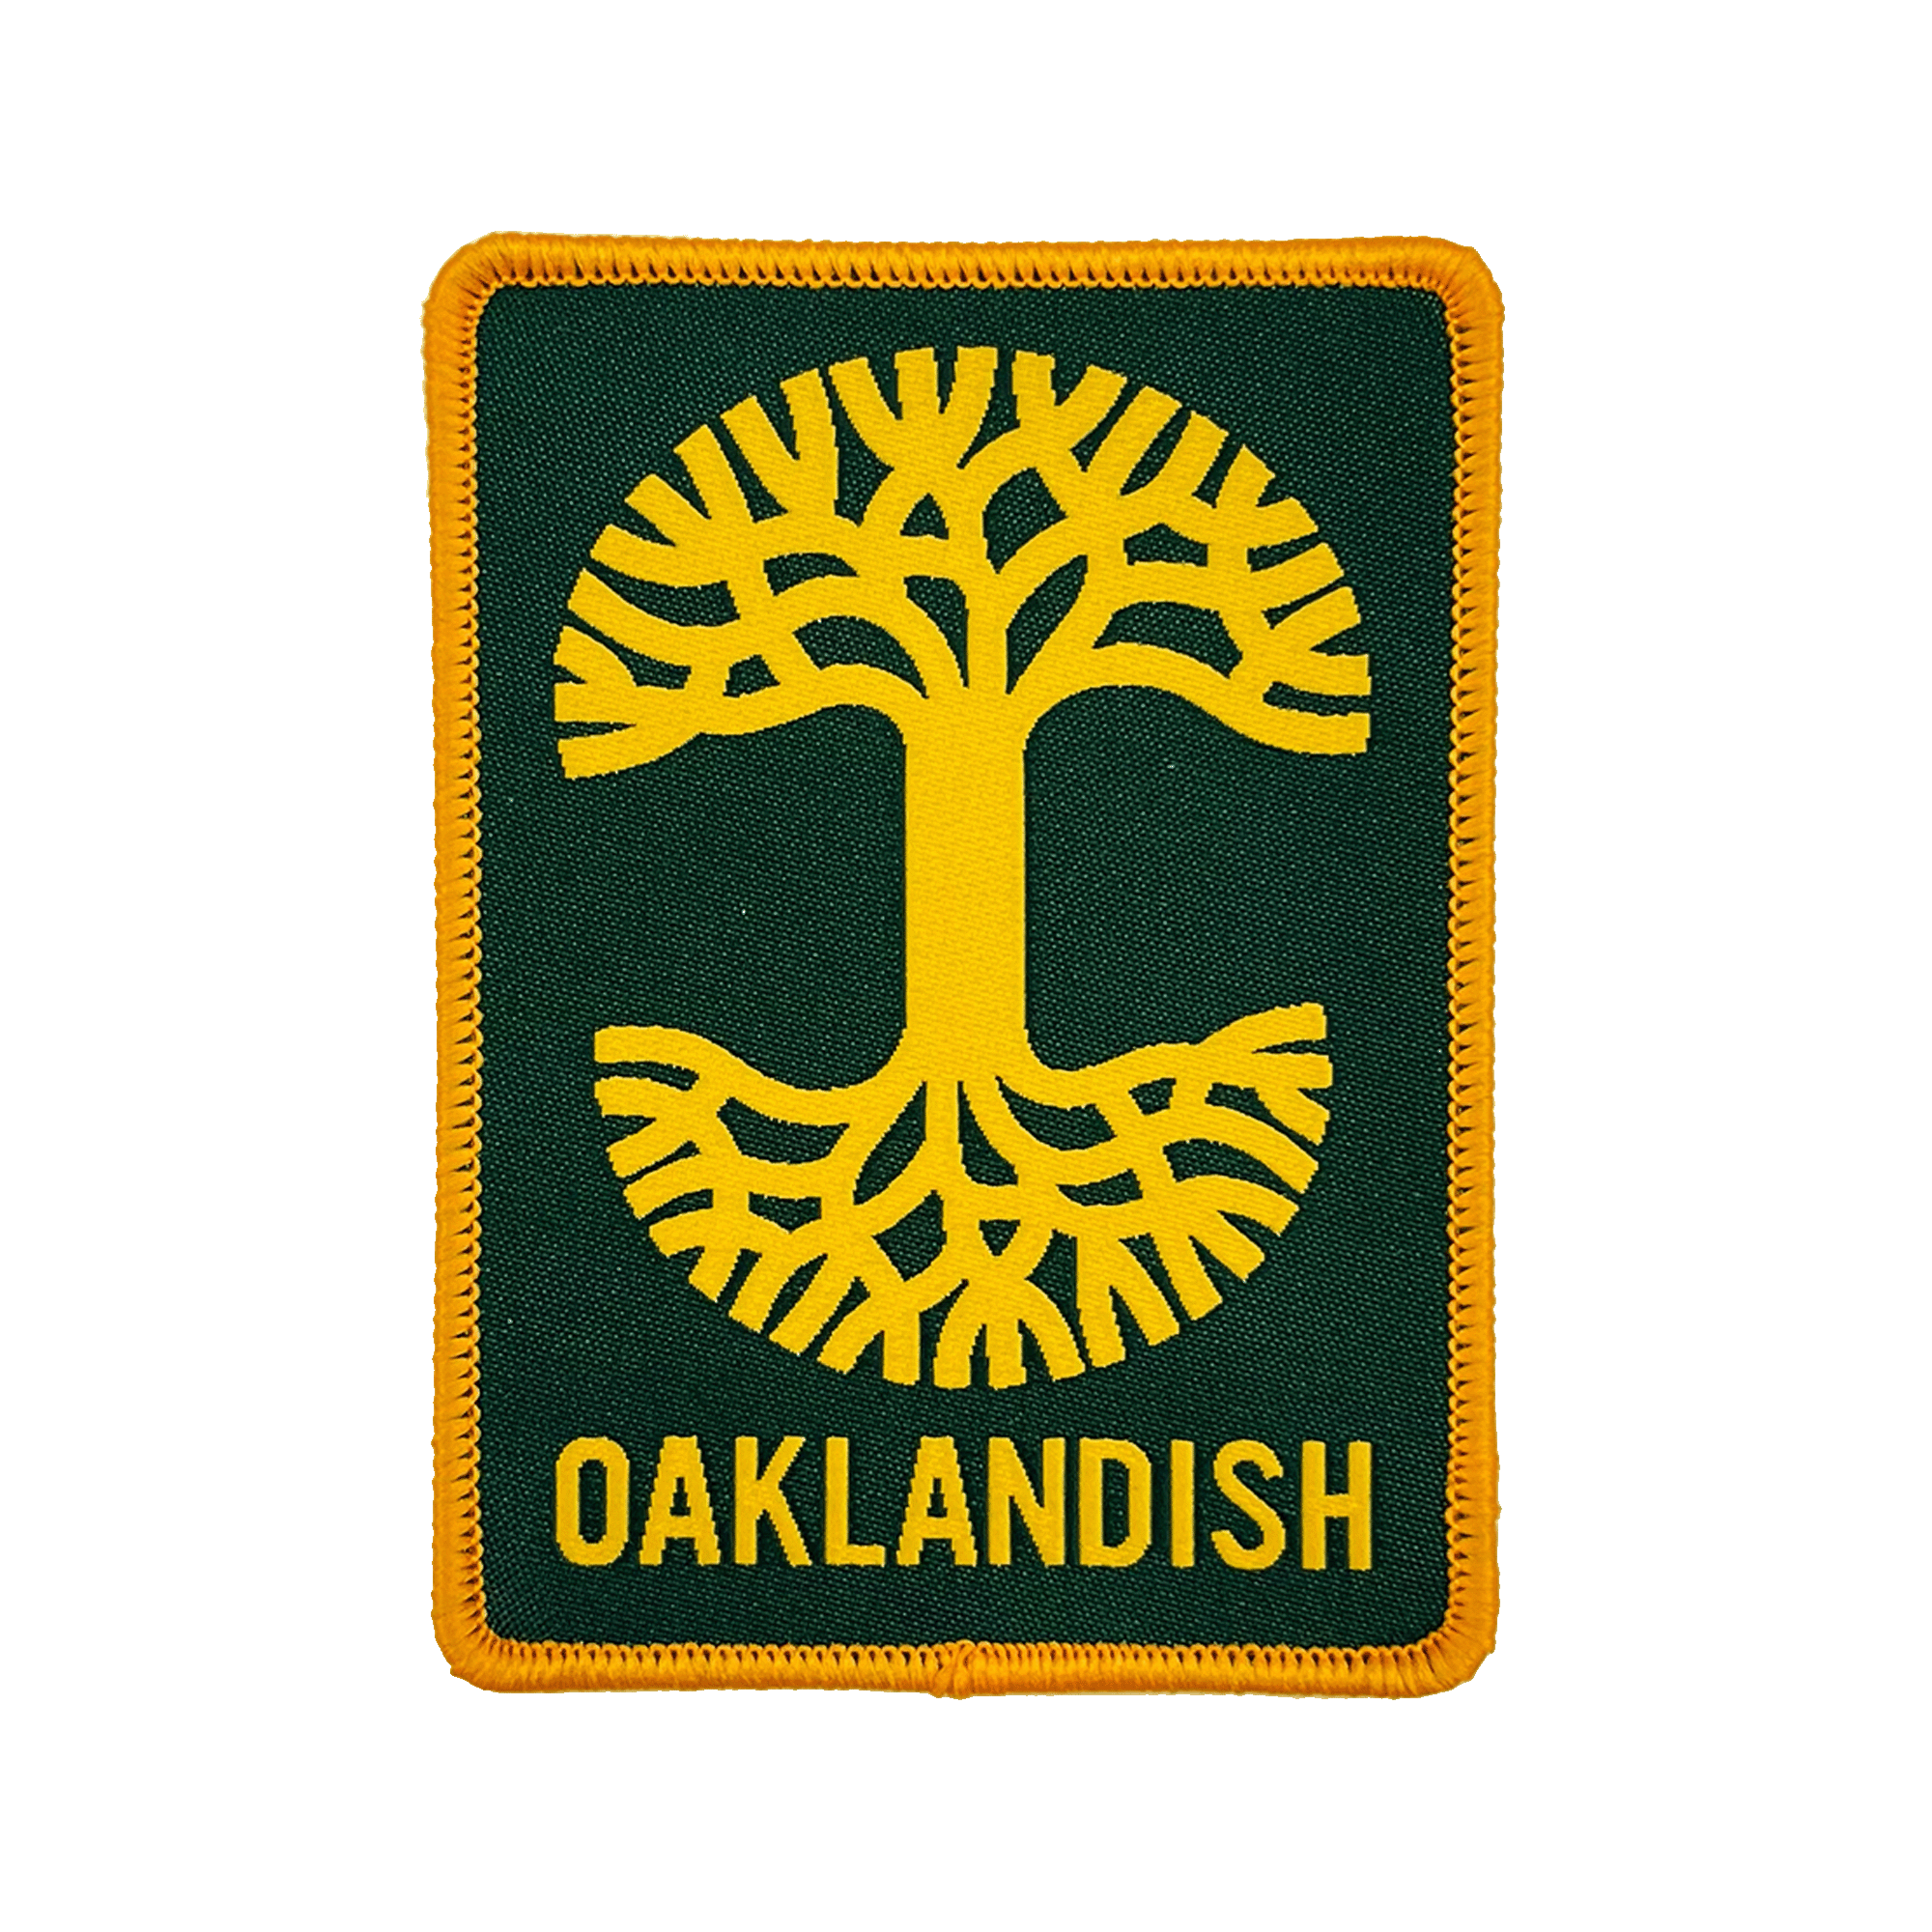 Forest green woven iron-on patch with gold Oaklandish tree logo and wordmark.